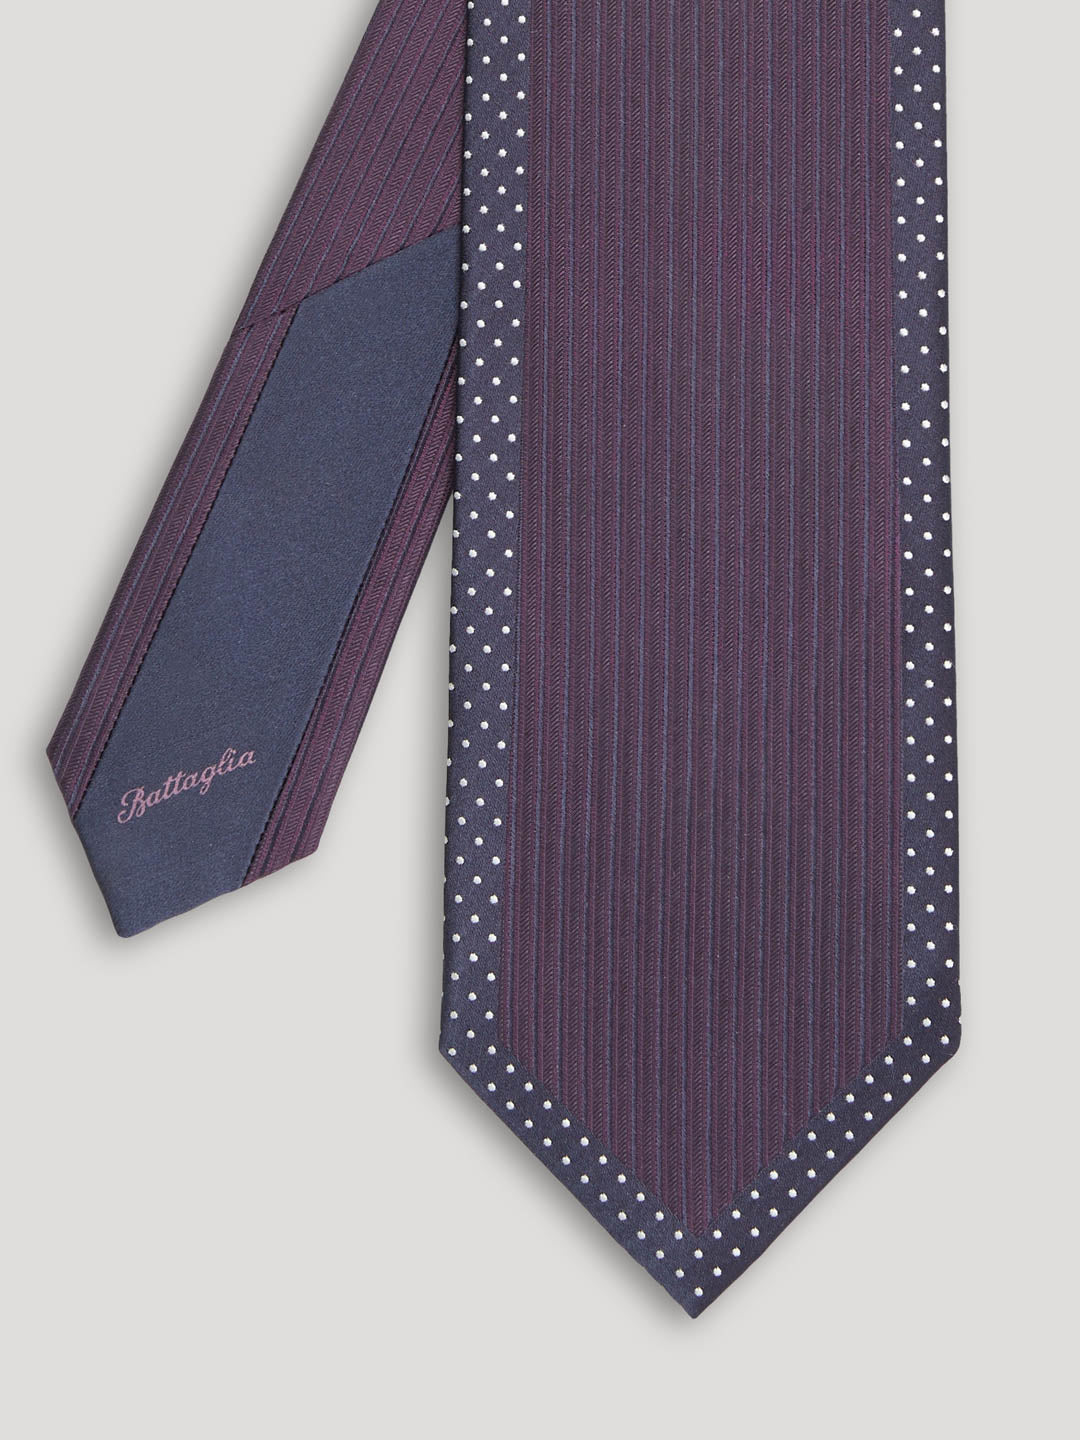 Deep purple tie with small white polkadots.  